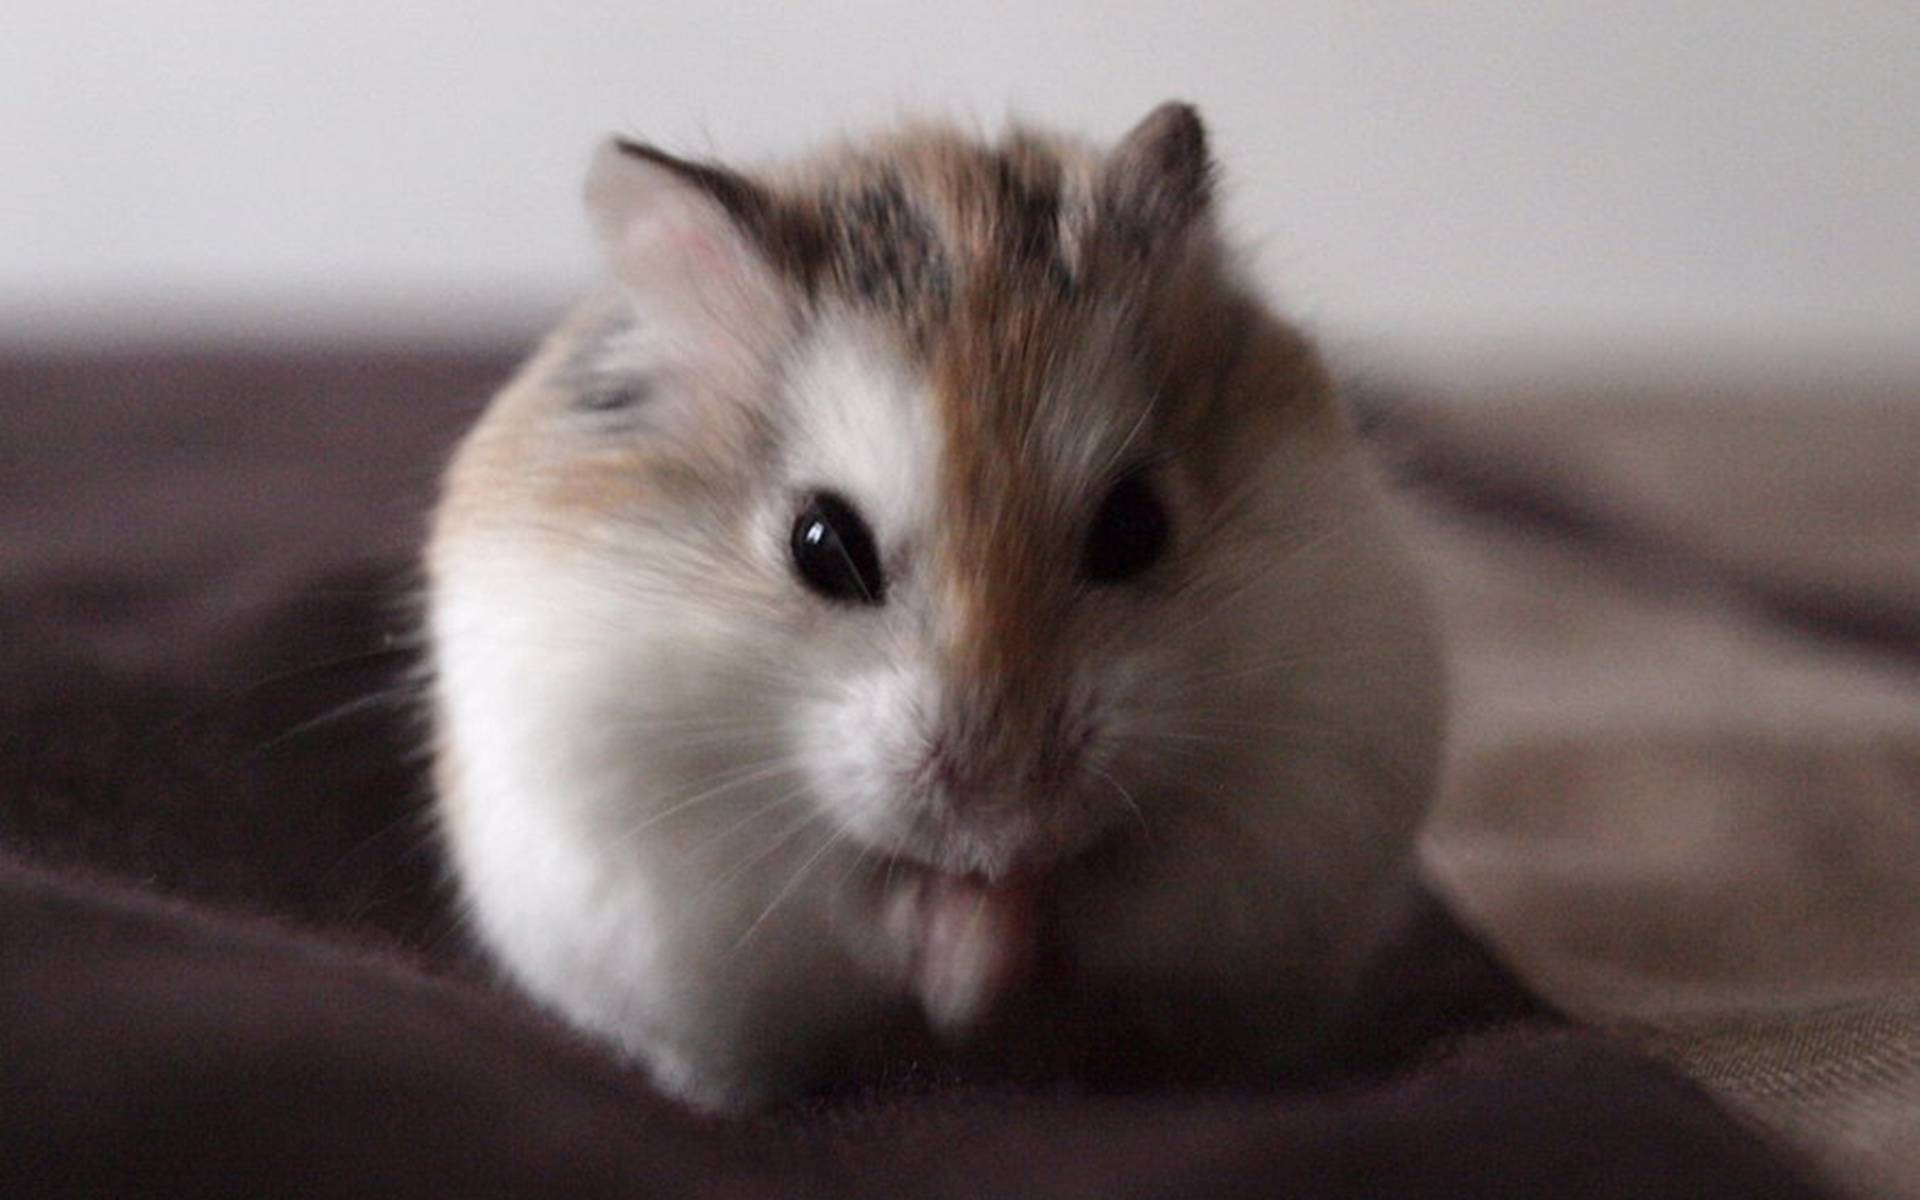 Cute Hamsters Wallpaper Android Application